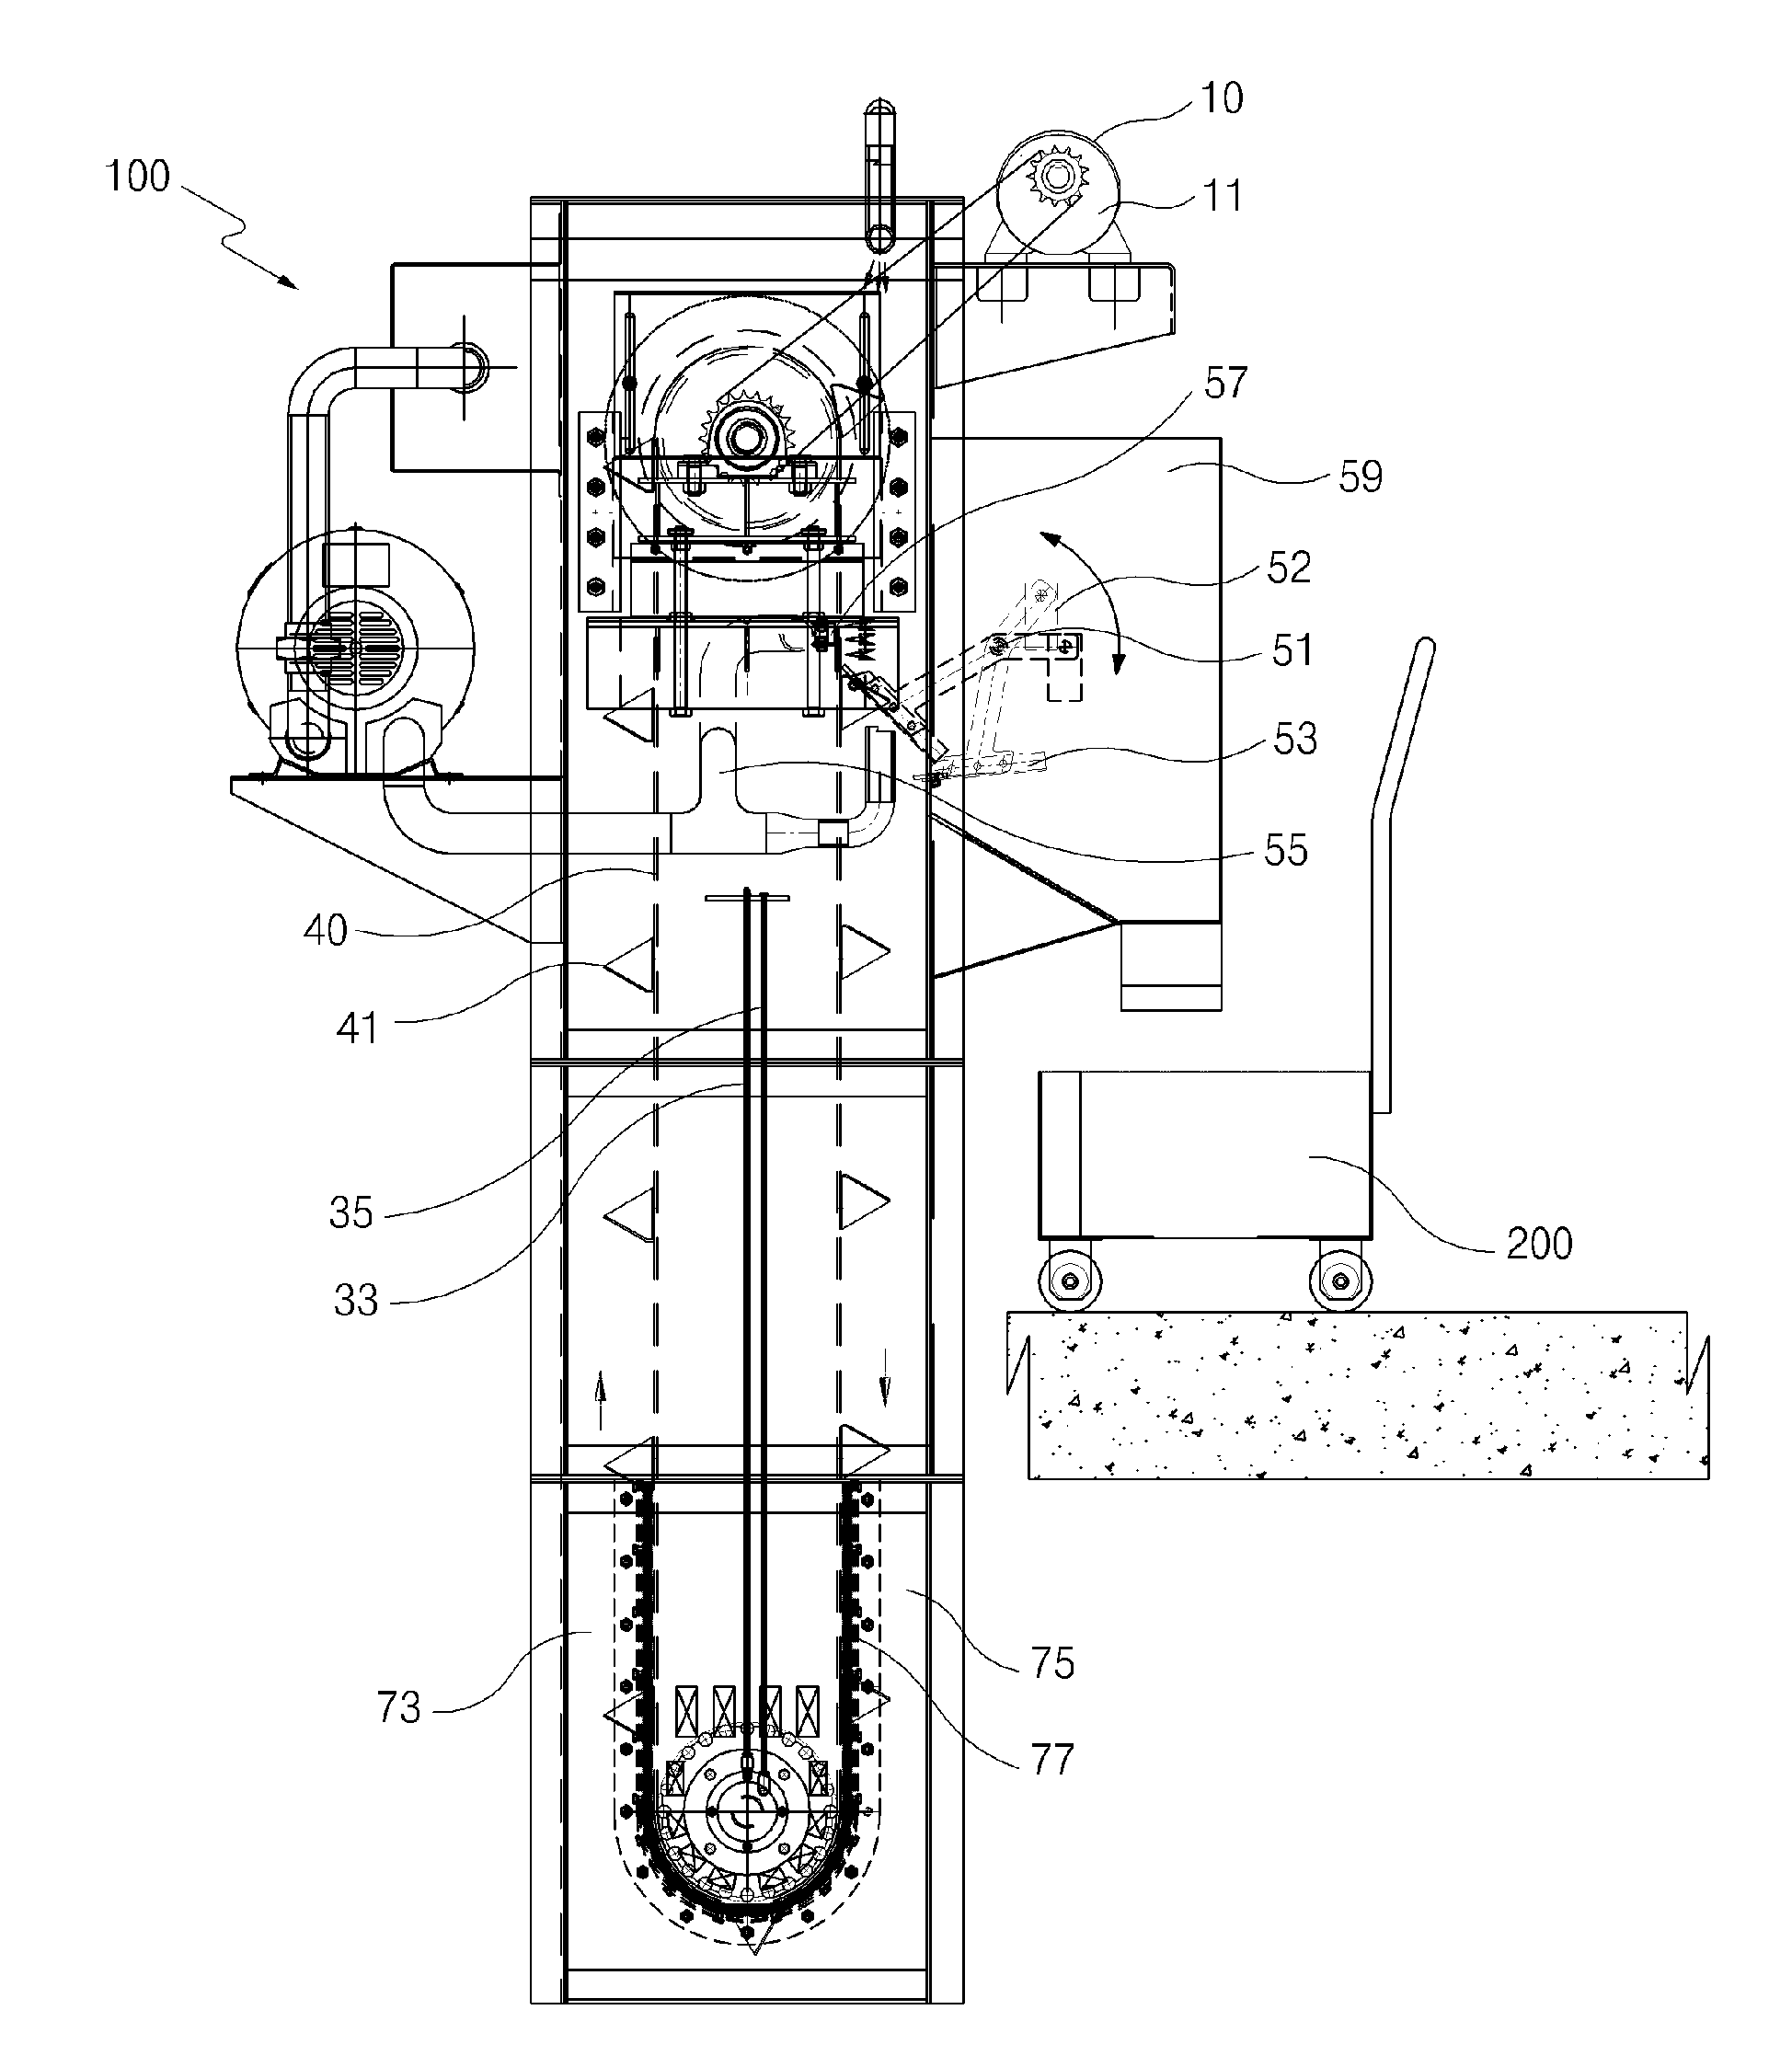 Apparatus for filtering sewage and wastewater